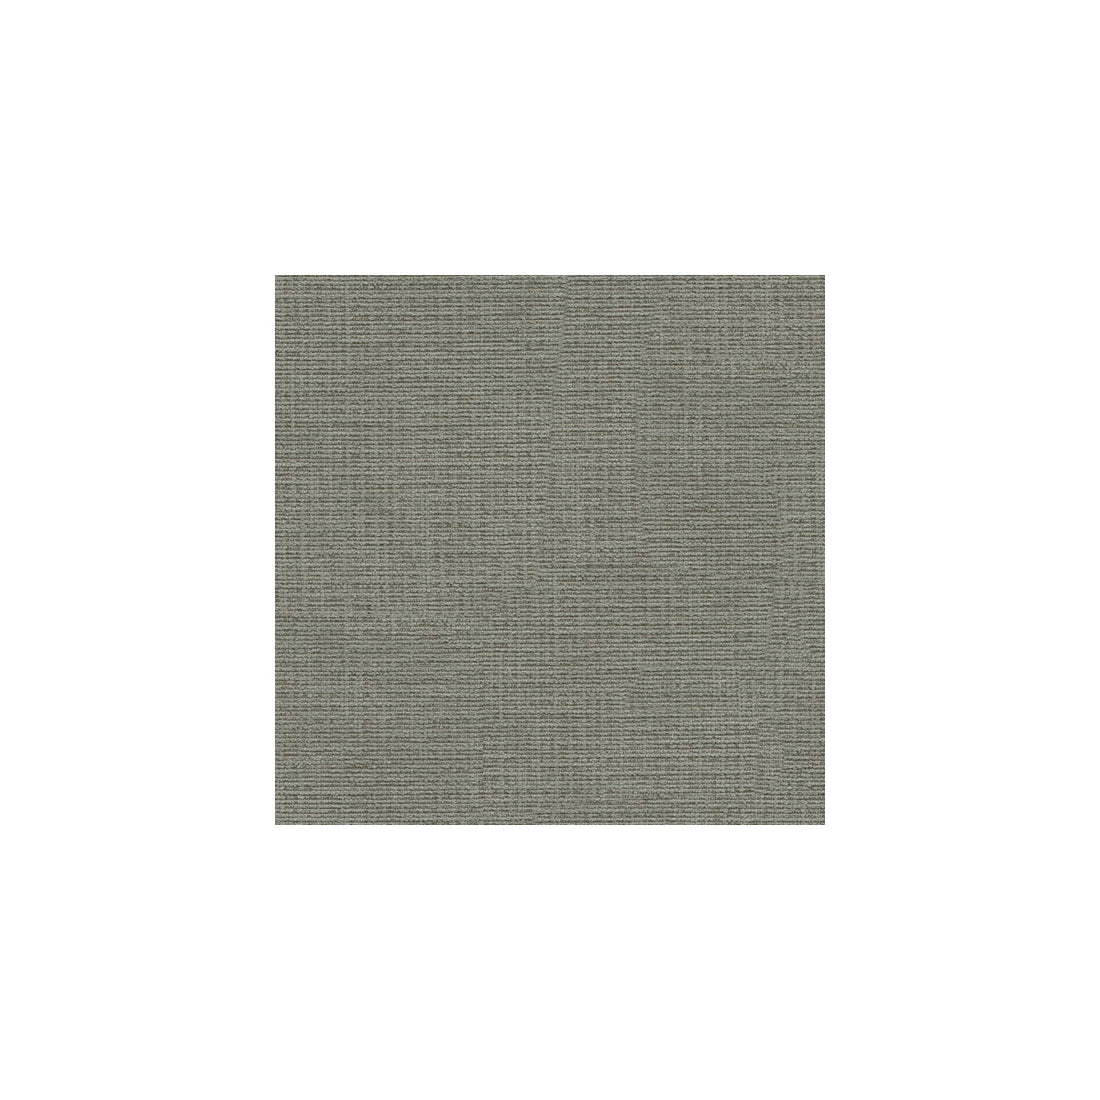 Kravet Basics fabric in 32314-52 color - pattern 32314.52.0 - by Kravet Basics in the Perfect Plains collection